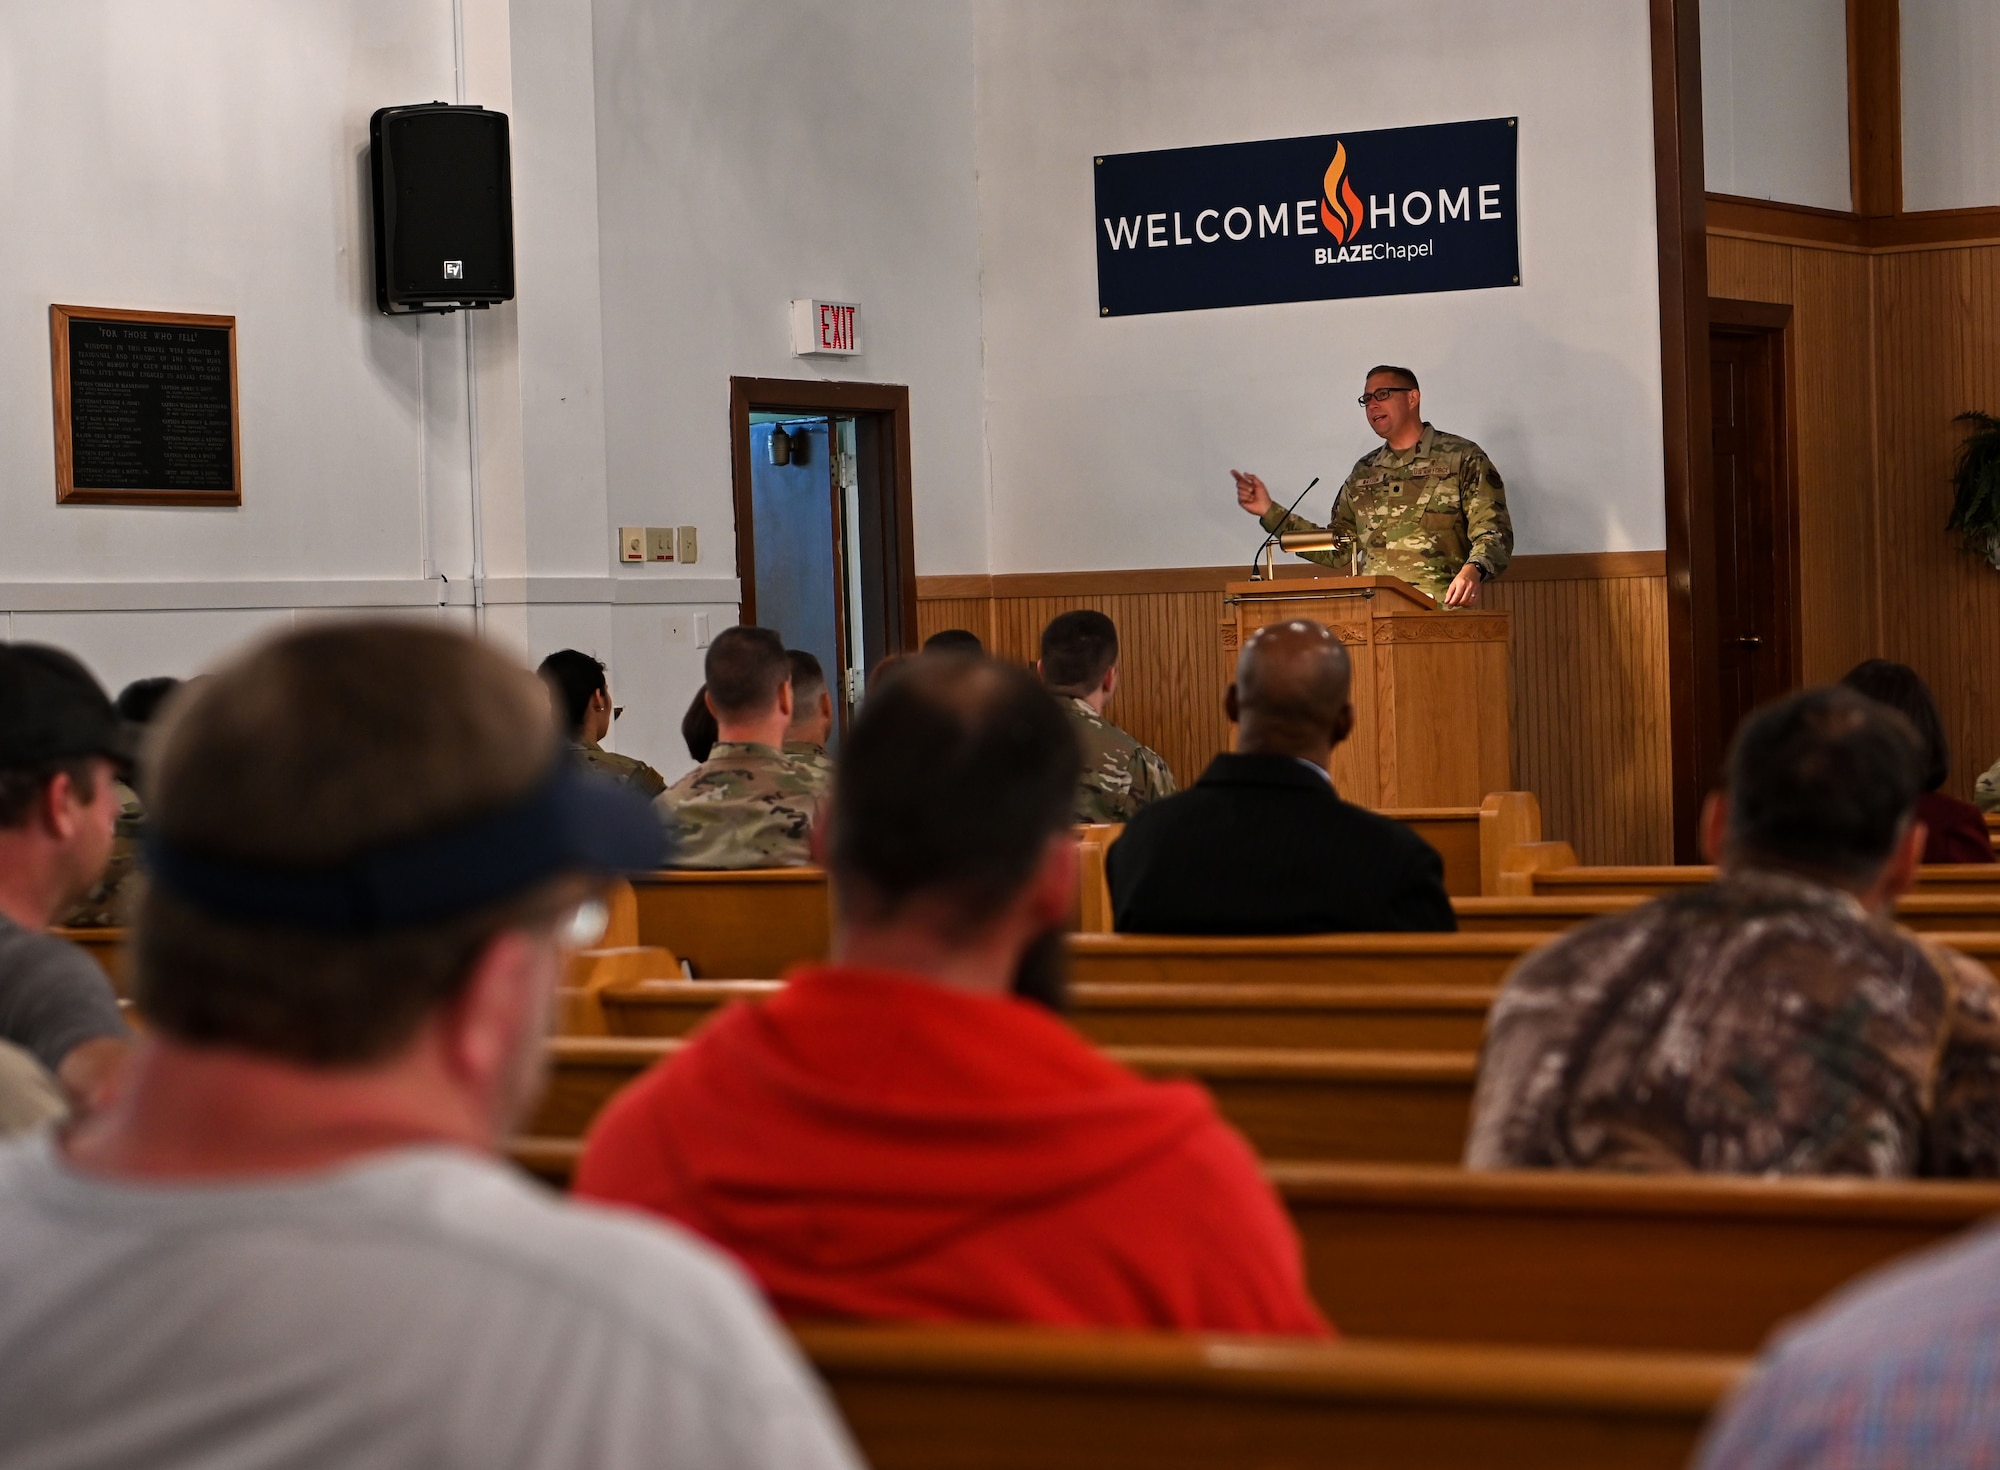 Lt. Col. Christopher Watson, 14th Flying Training Wing chaplain, speaks to a crowd at the 80th Anniversary of the Columbus Air Force Base Chapel on April 5, 2022, at Columbus AFB, Miss. The Chapel is the oldest building on Columbus AFB. (U.S. Air Force photo by Senior Airman Davis Donaldson)